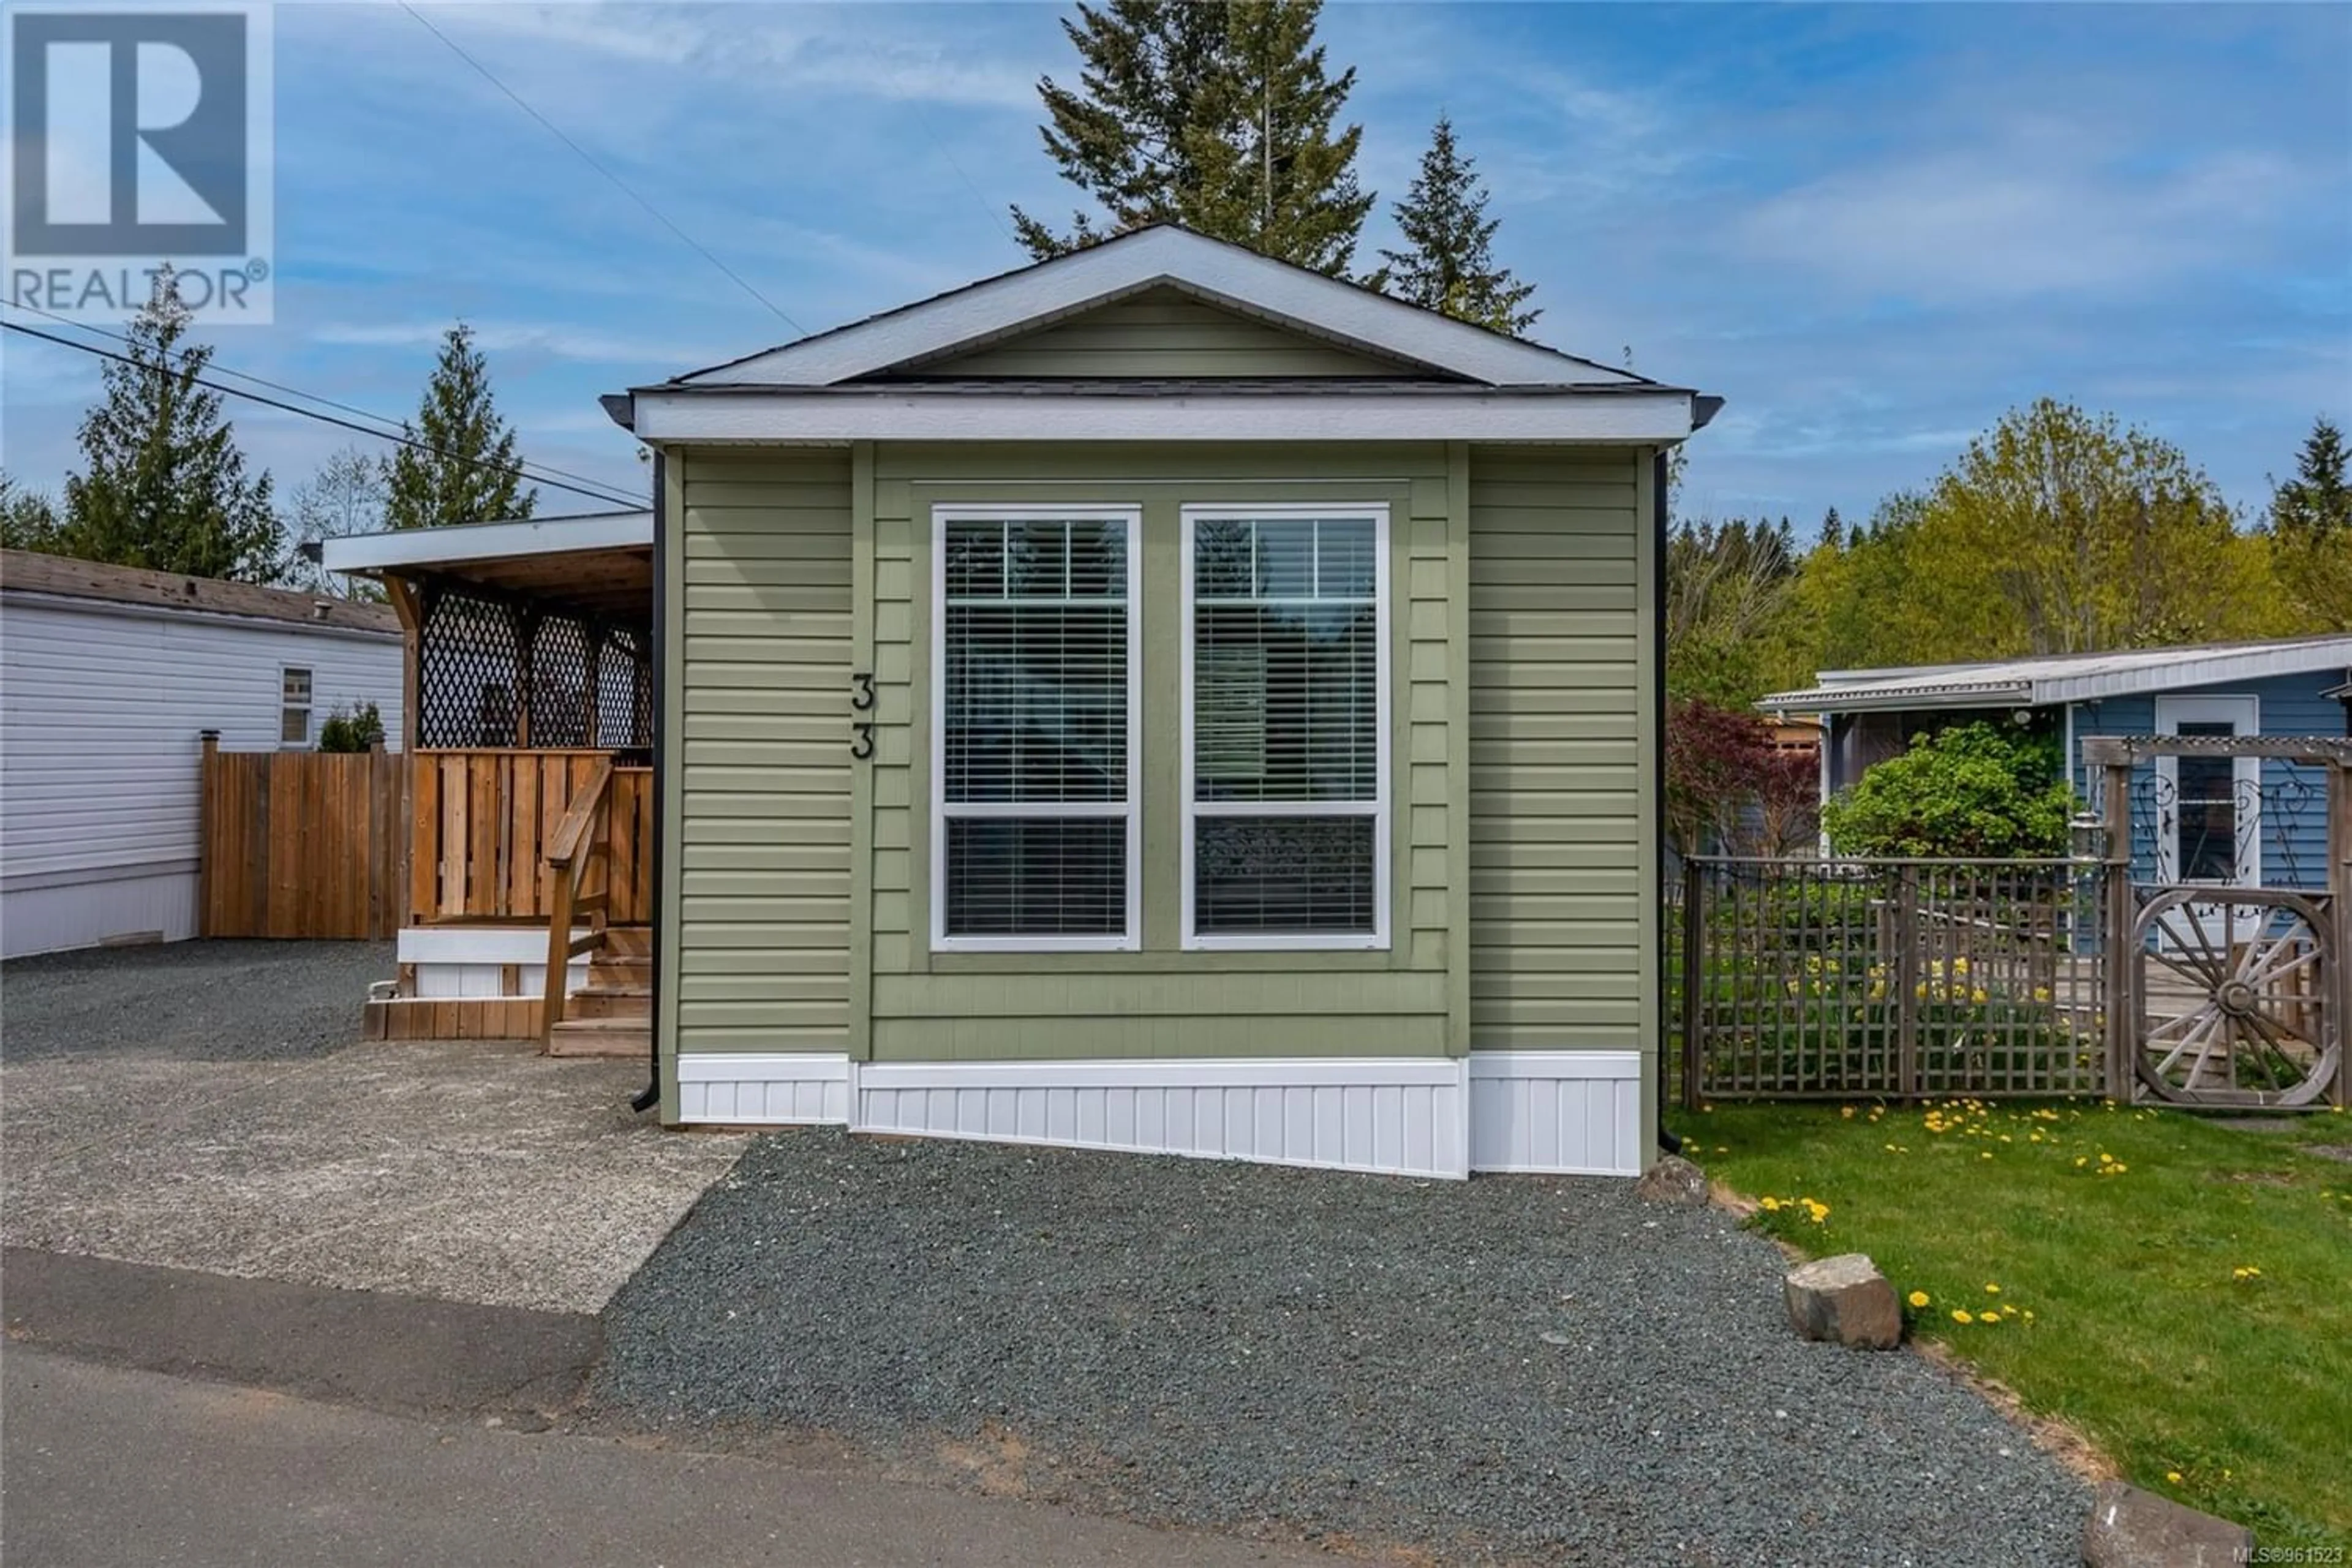 Home with vinyl exterior material for 33 2520 Quinsam Rd, Campbell River British Columbia V9W4N4